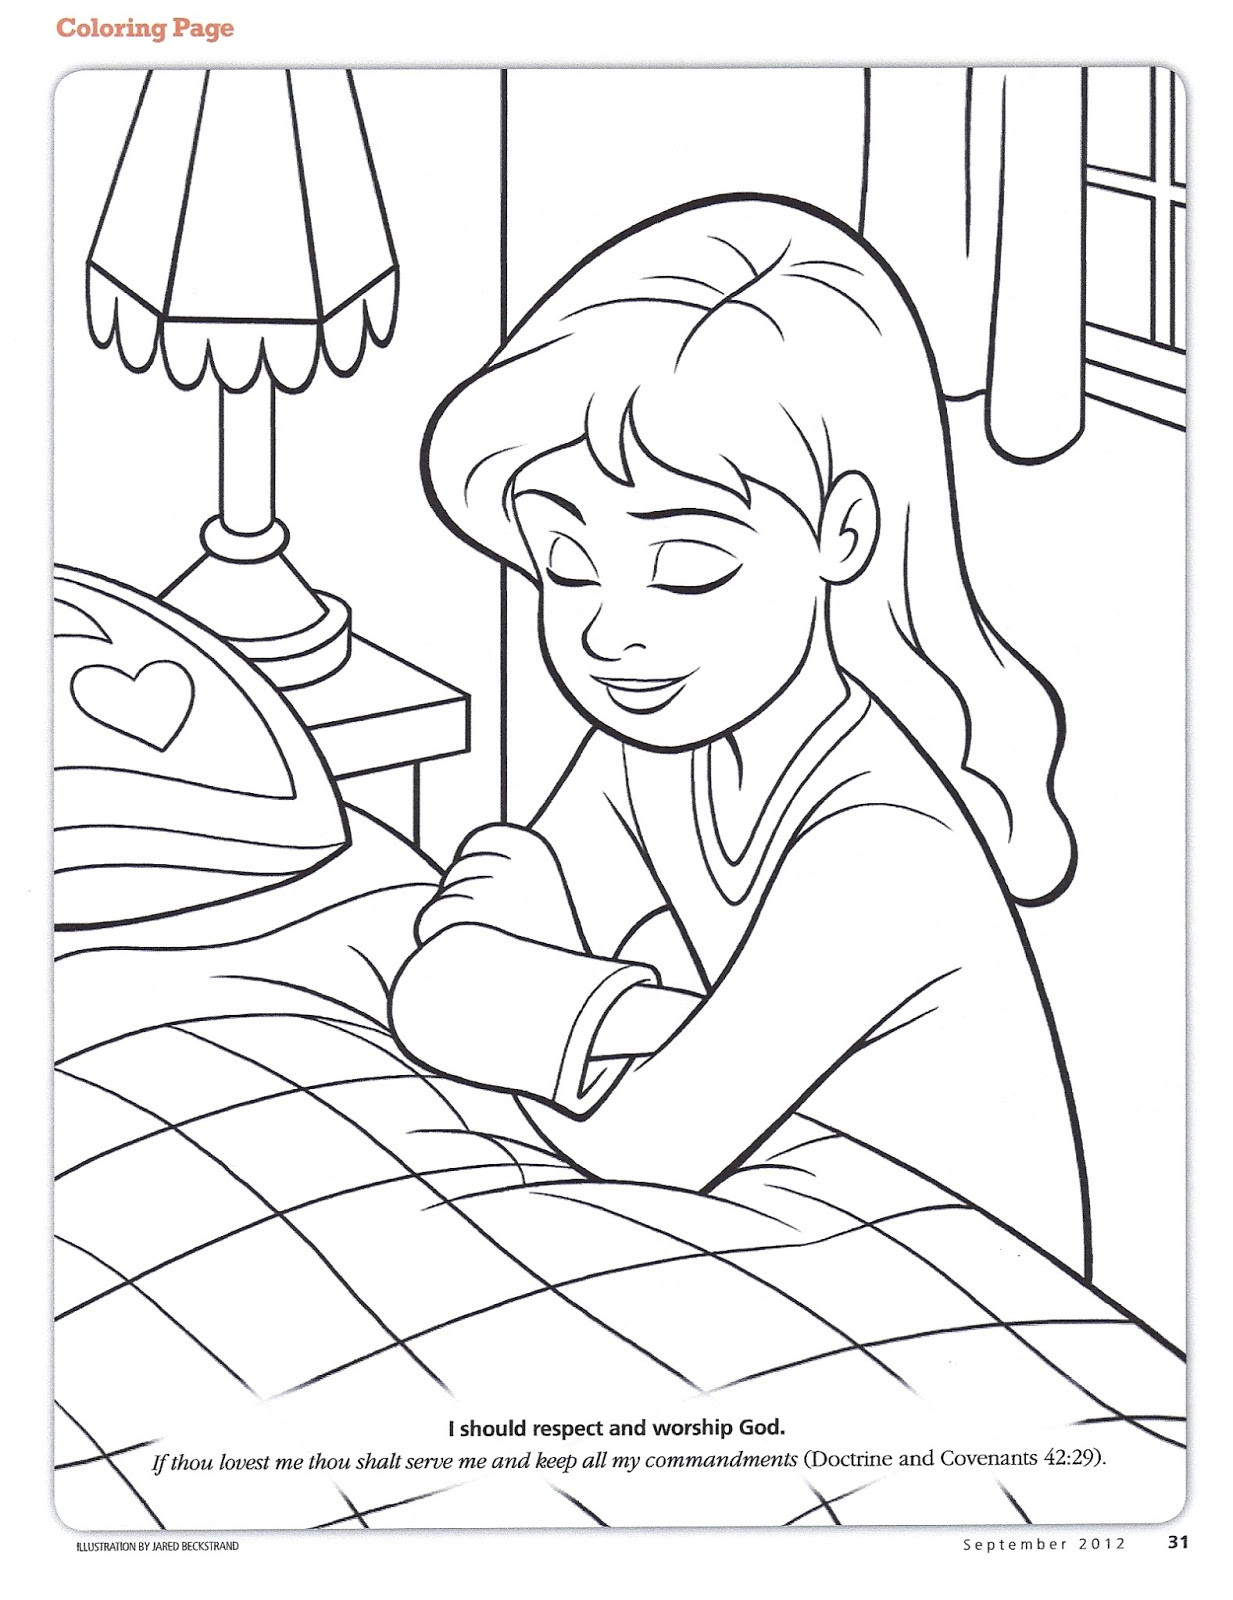 Child Praying Coloring Page
 Happy Clean Living Primary 3 Lesson 19